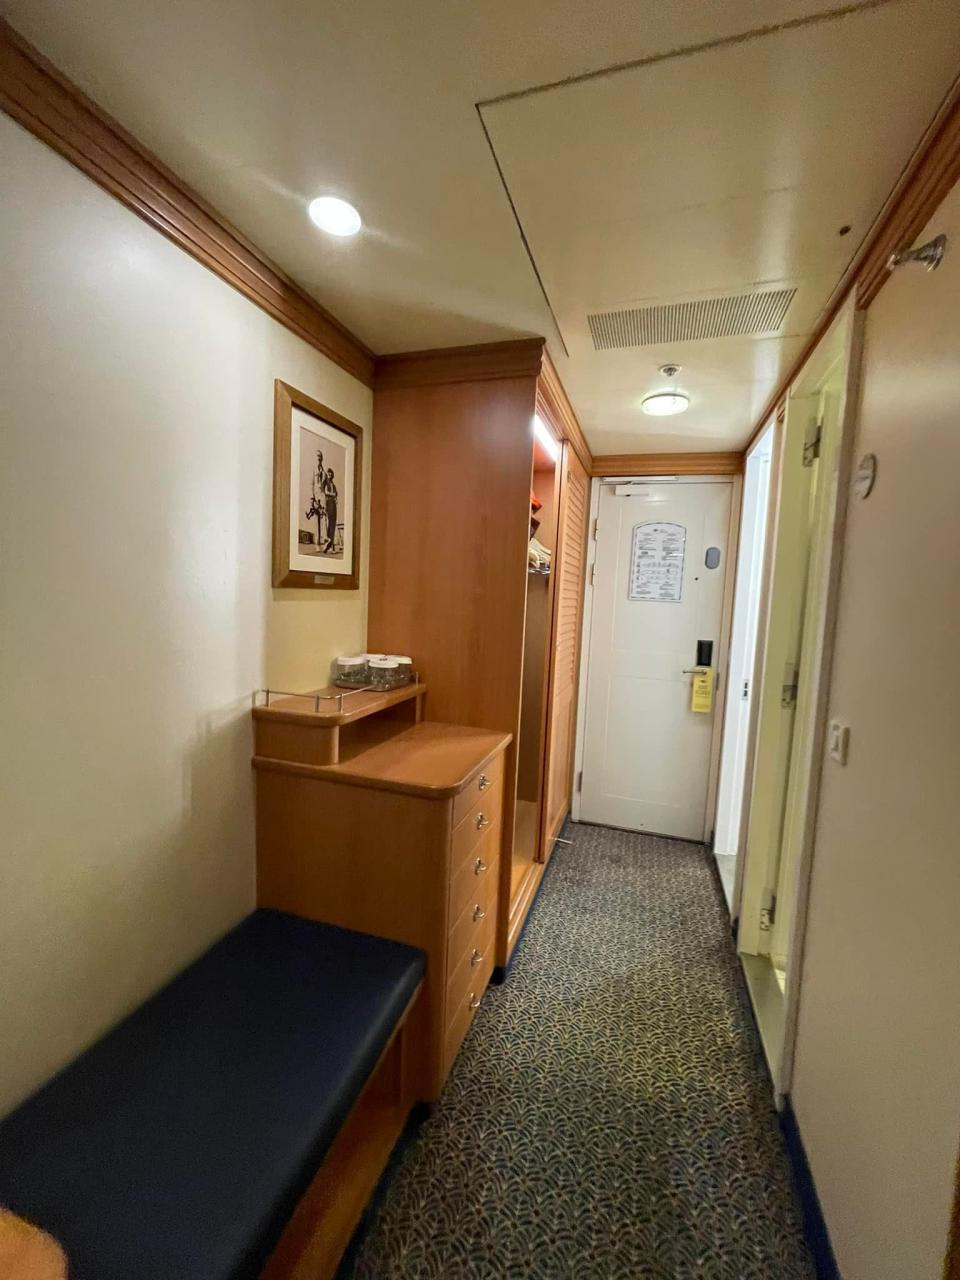 storage options in a deluxe inside stateroom on a disney magic cruise ship